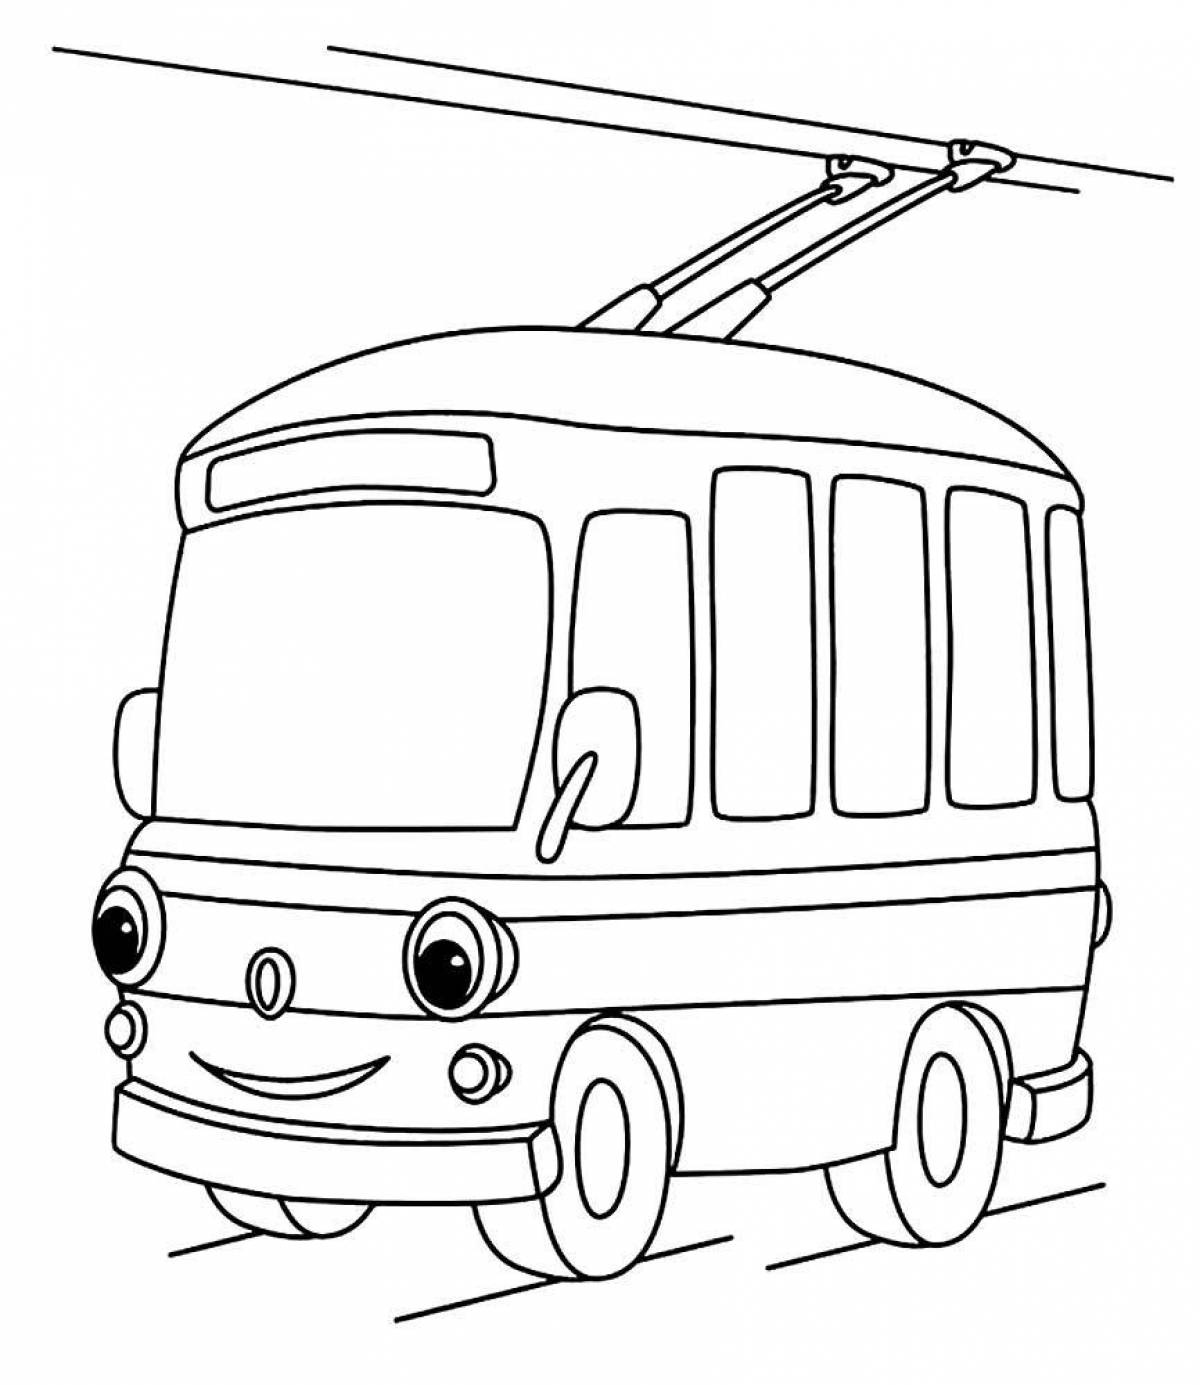 Colorful transport coloring book for kids 6-7 years old